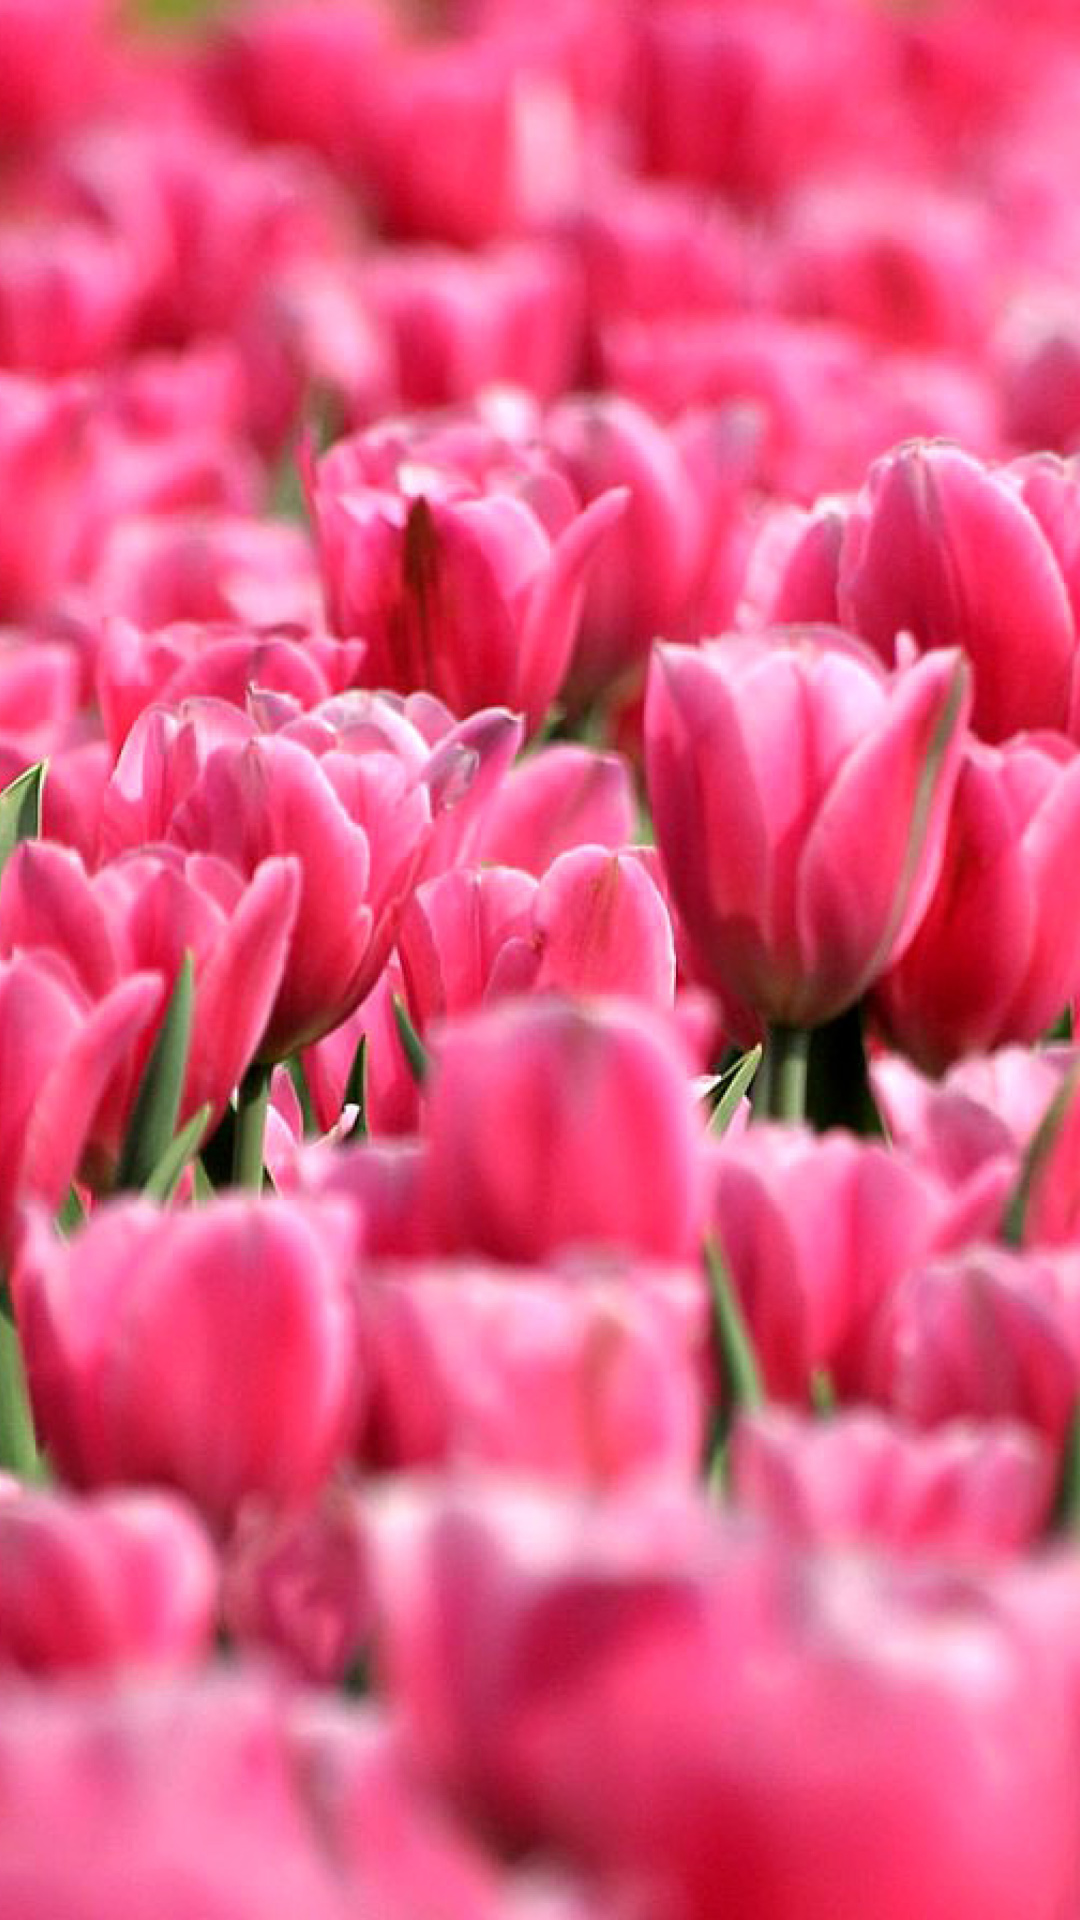 Pink Tulips in Holland Festival wallpaper 1080x1920